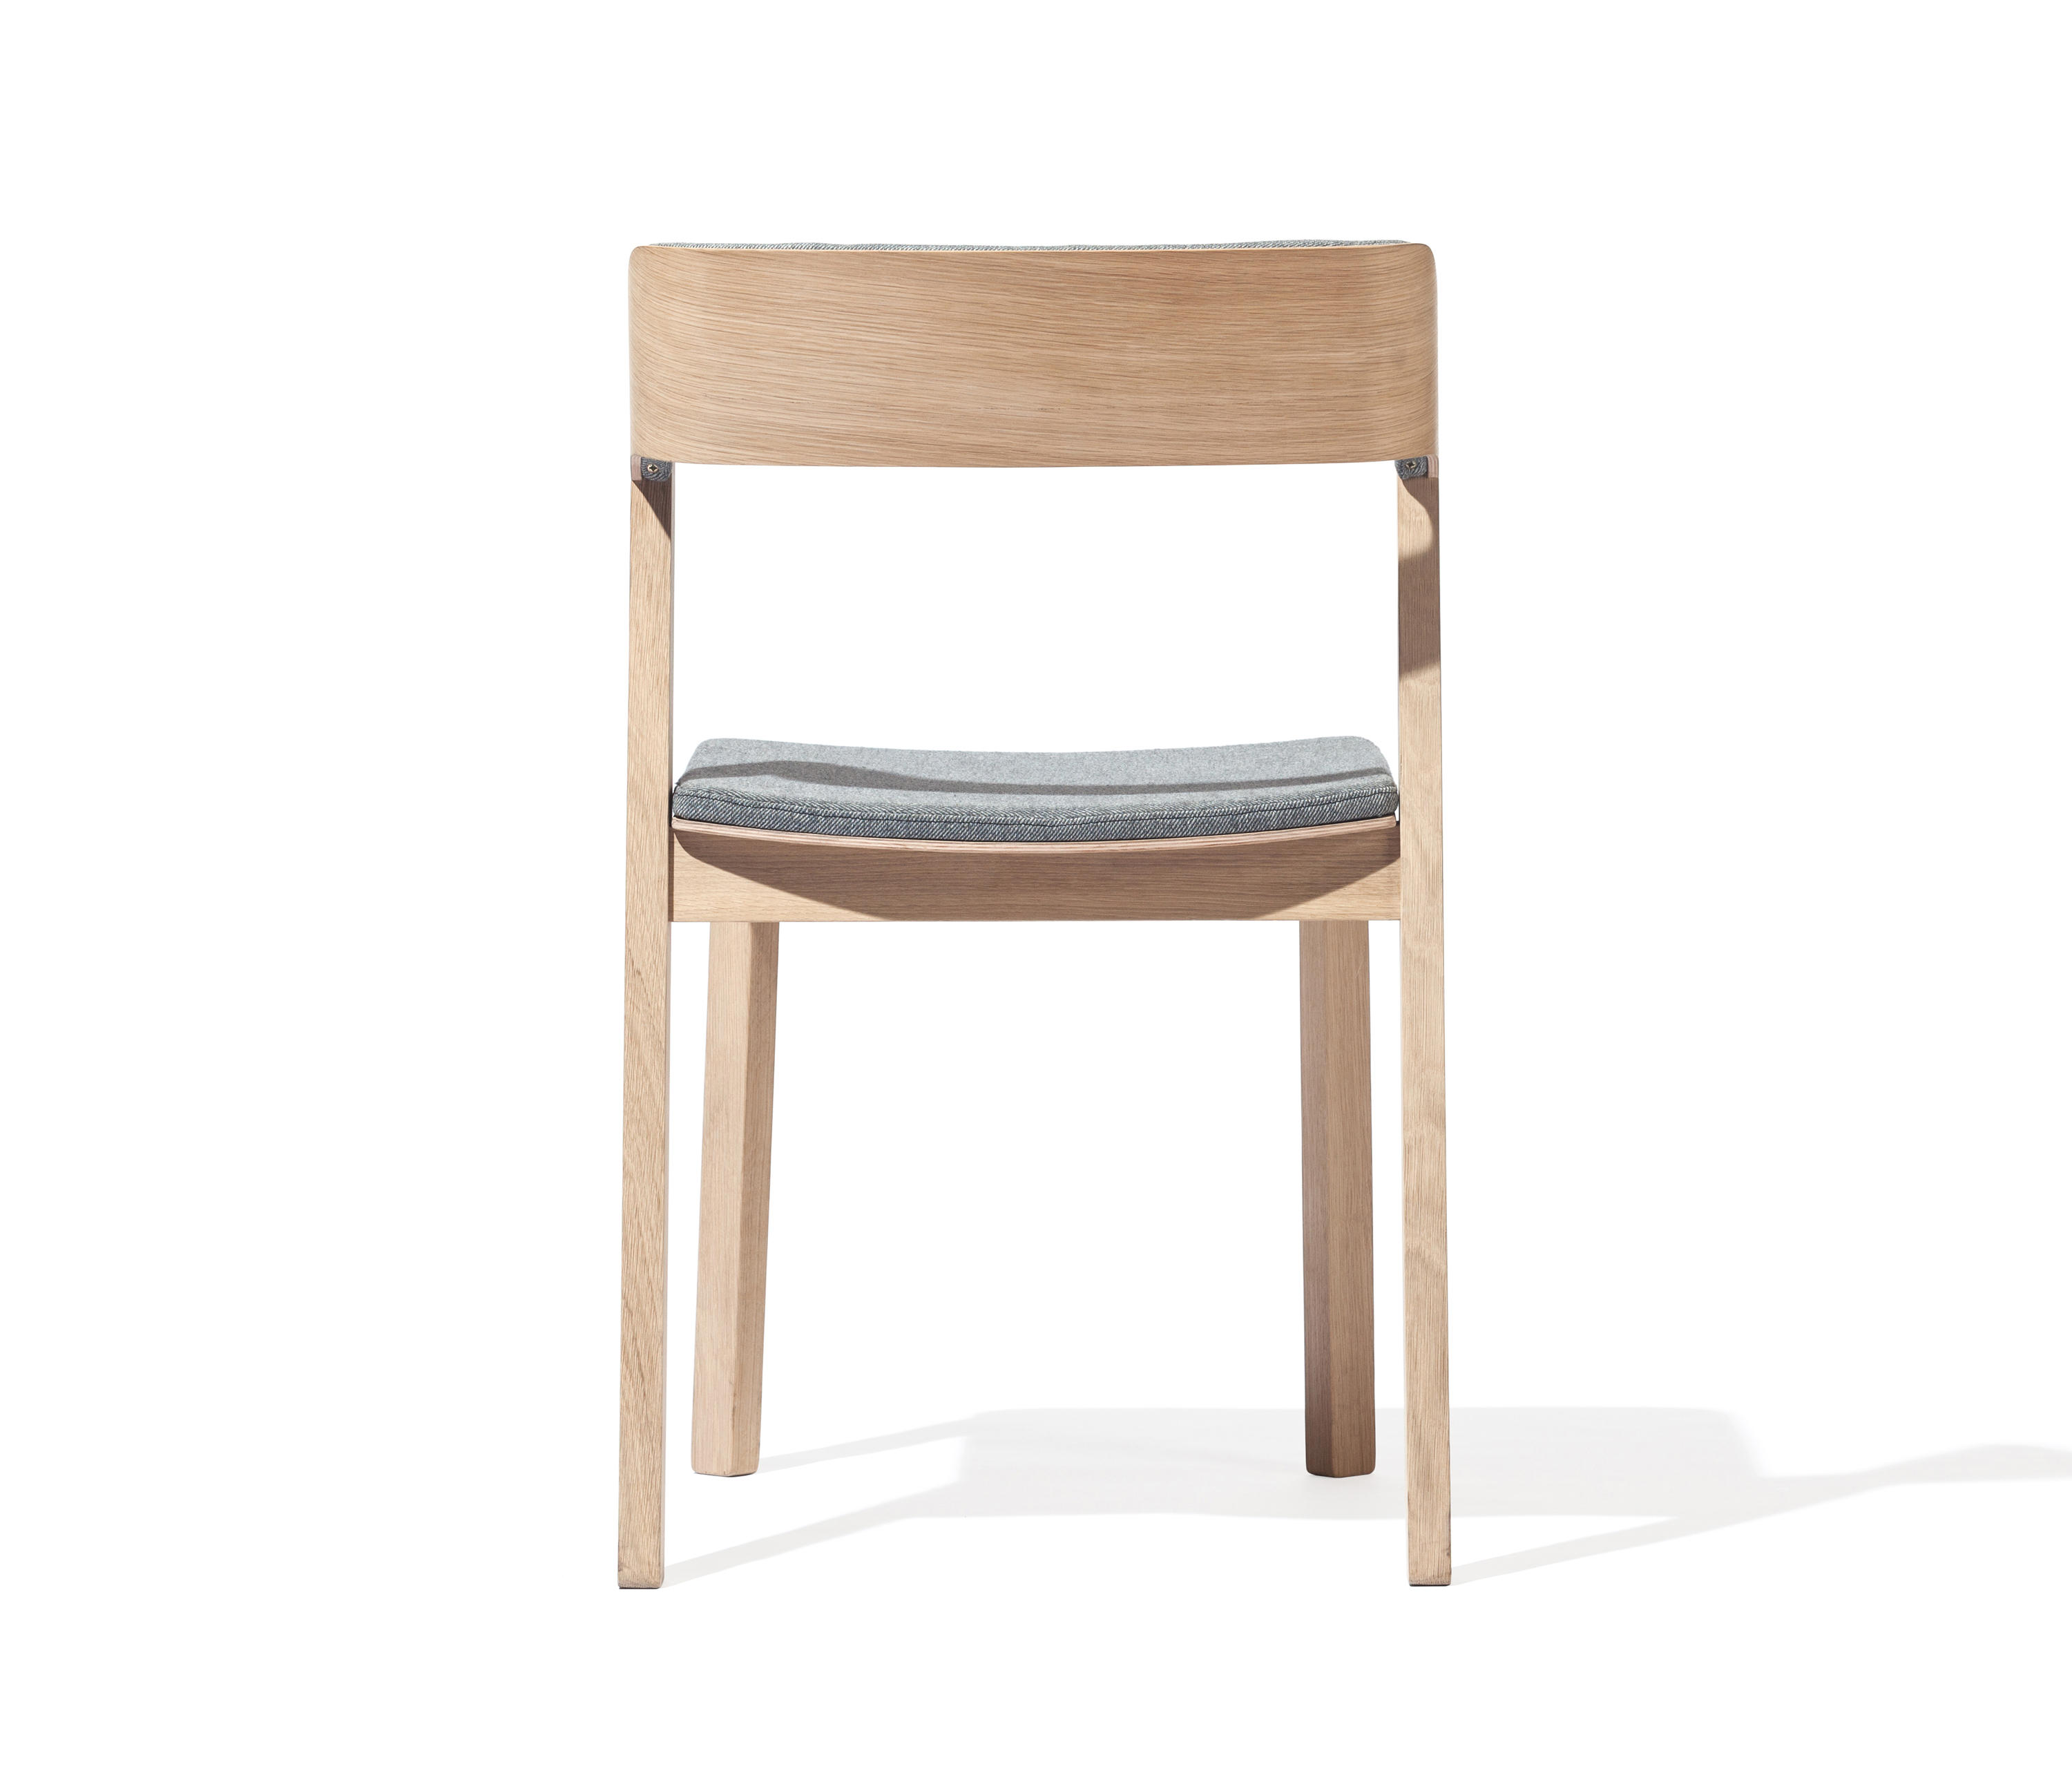 MERANO CHAIR UPHOLSTERED - Restaurant chairs from TON | Architonic